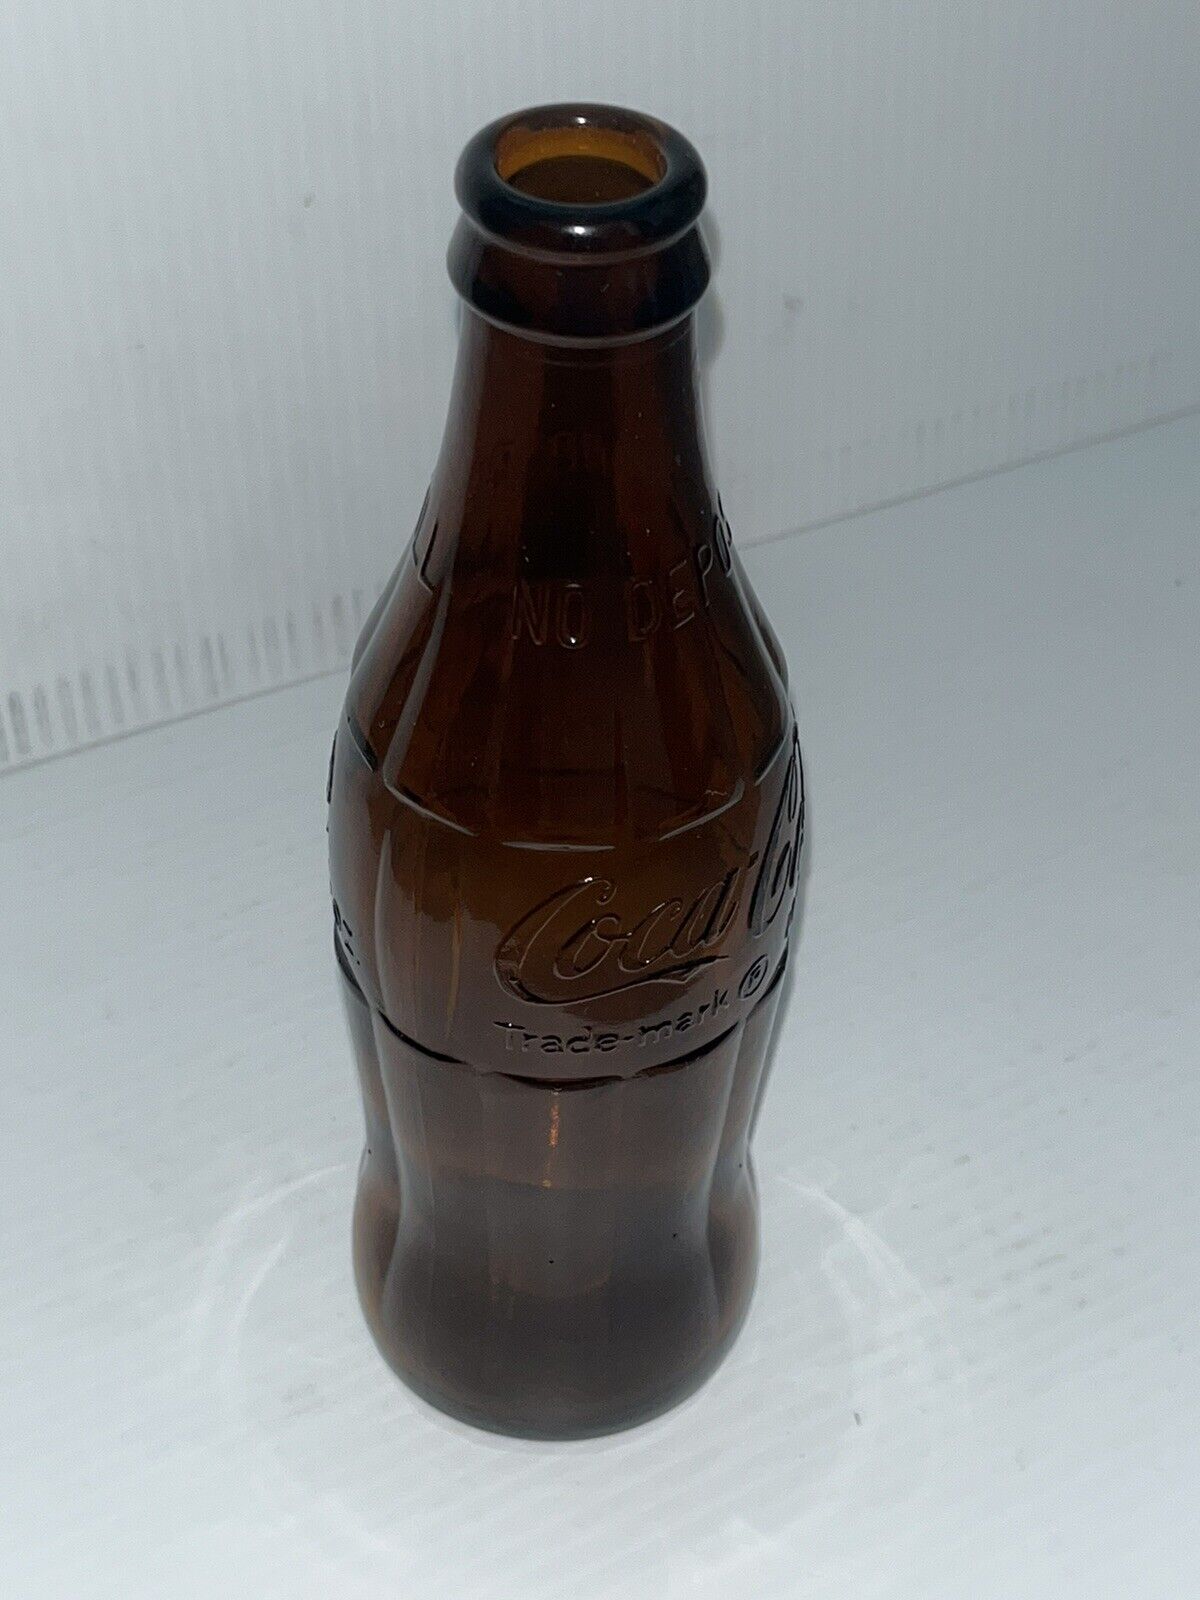 Unreleased Rare Coors Contracted Coca-Cola Brown Bottle